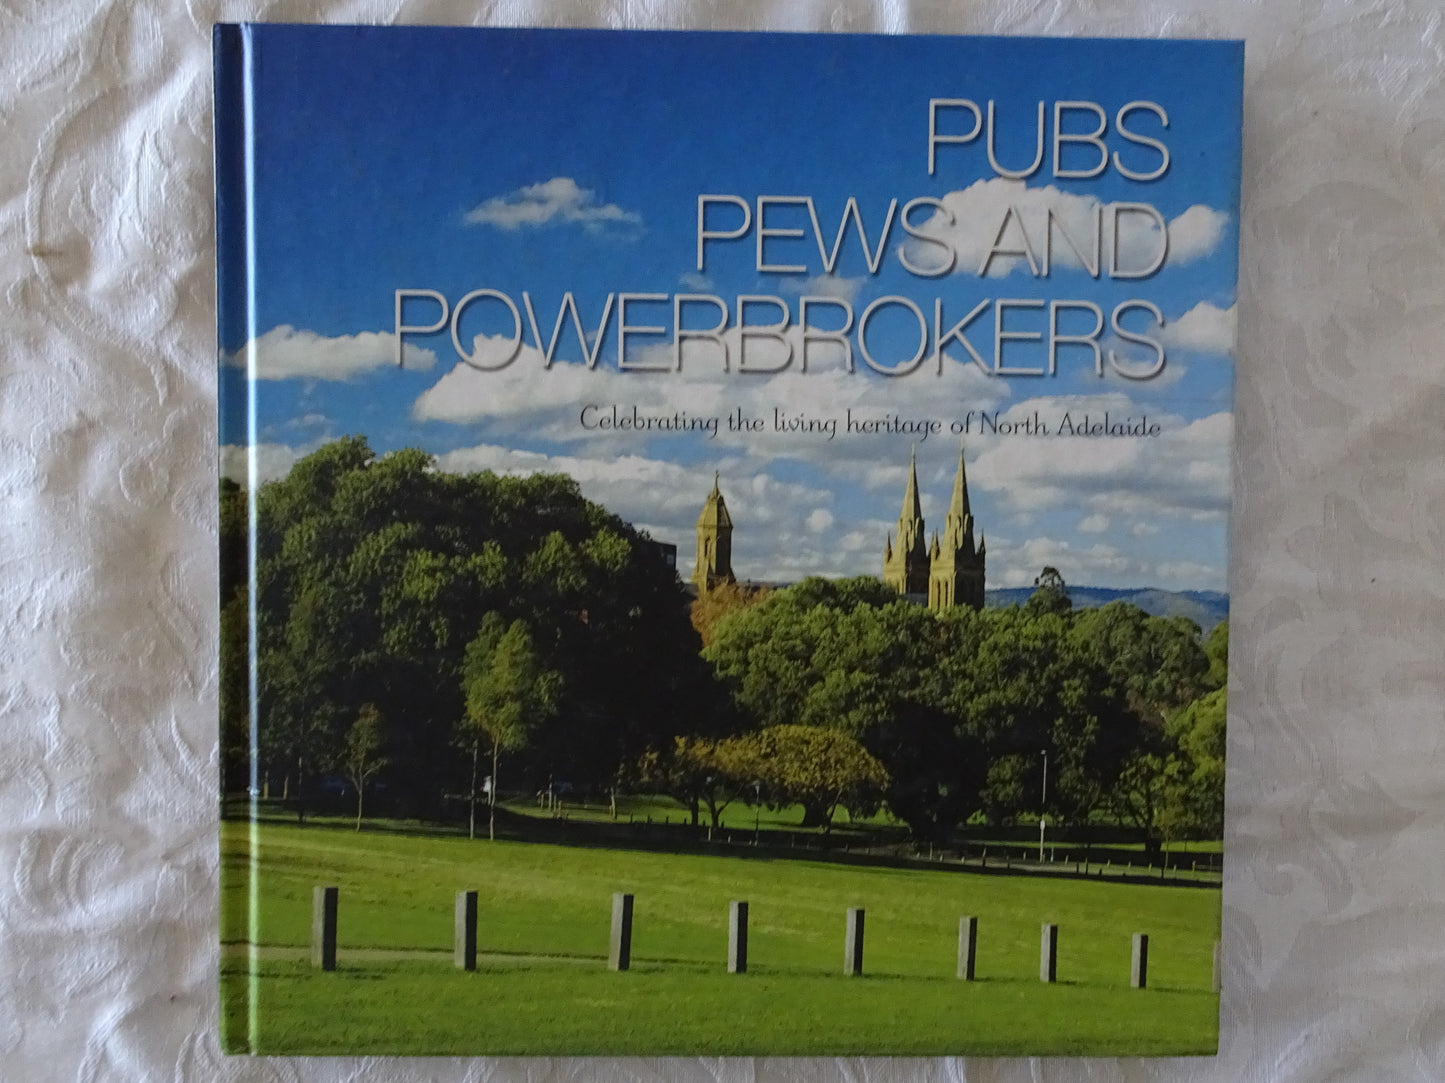 Pubs Pews and Powerbrokers by Max Anderson